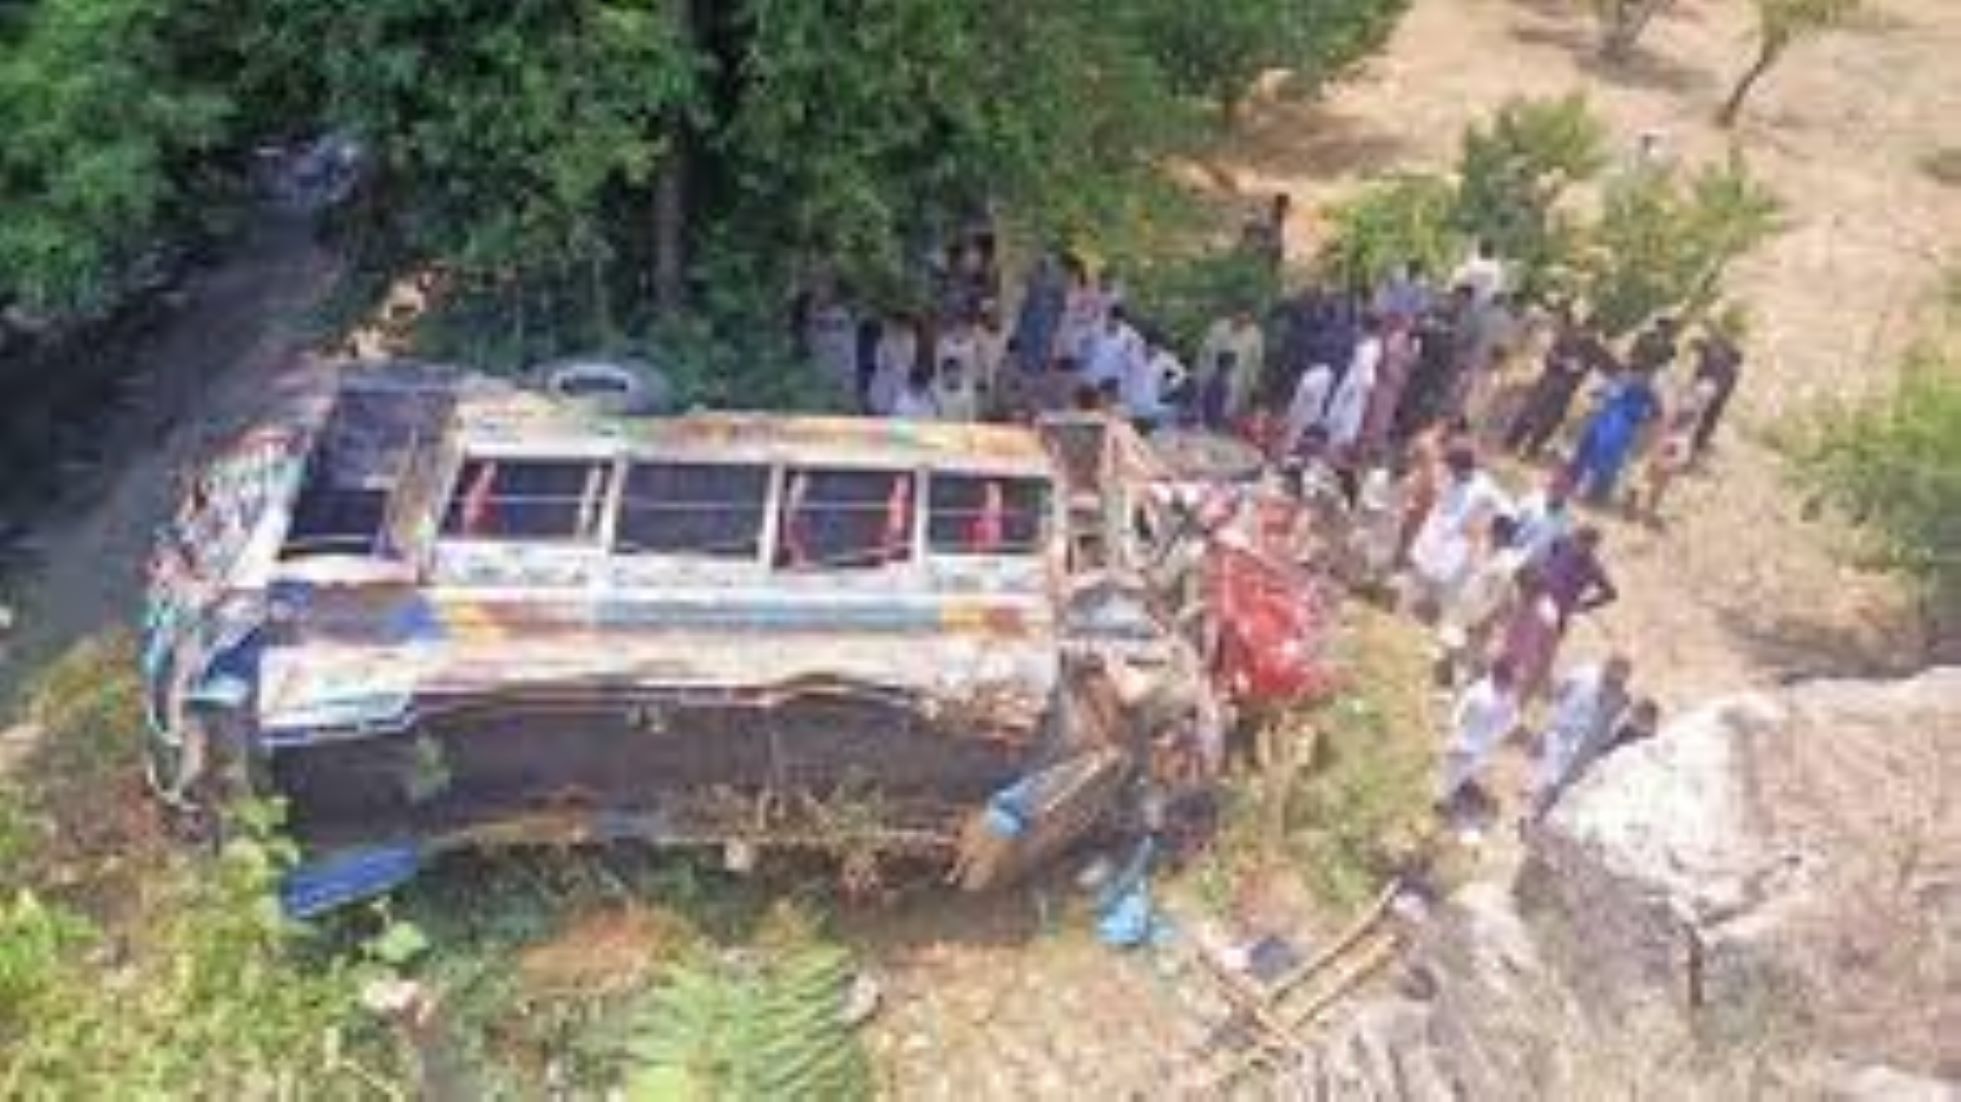 One Killed, 41 Injured After Bus Plunged Into Ditch In NW Pakistan